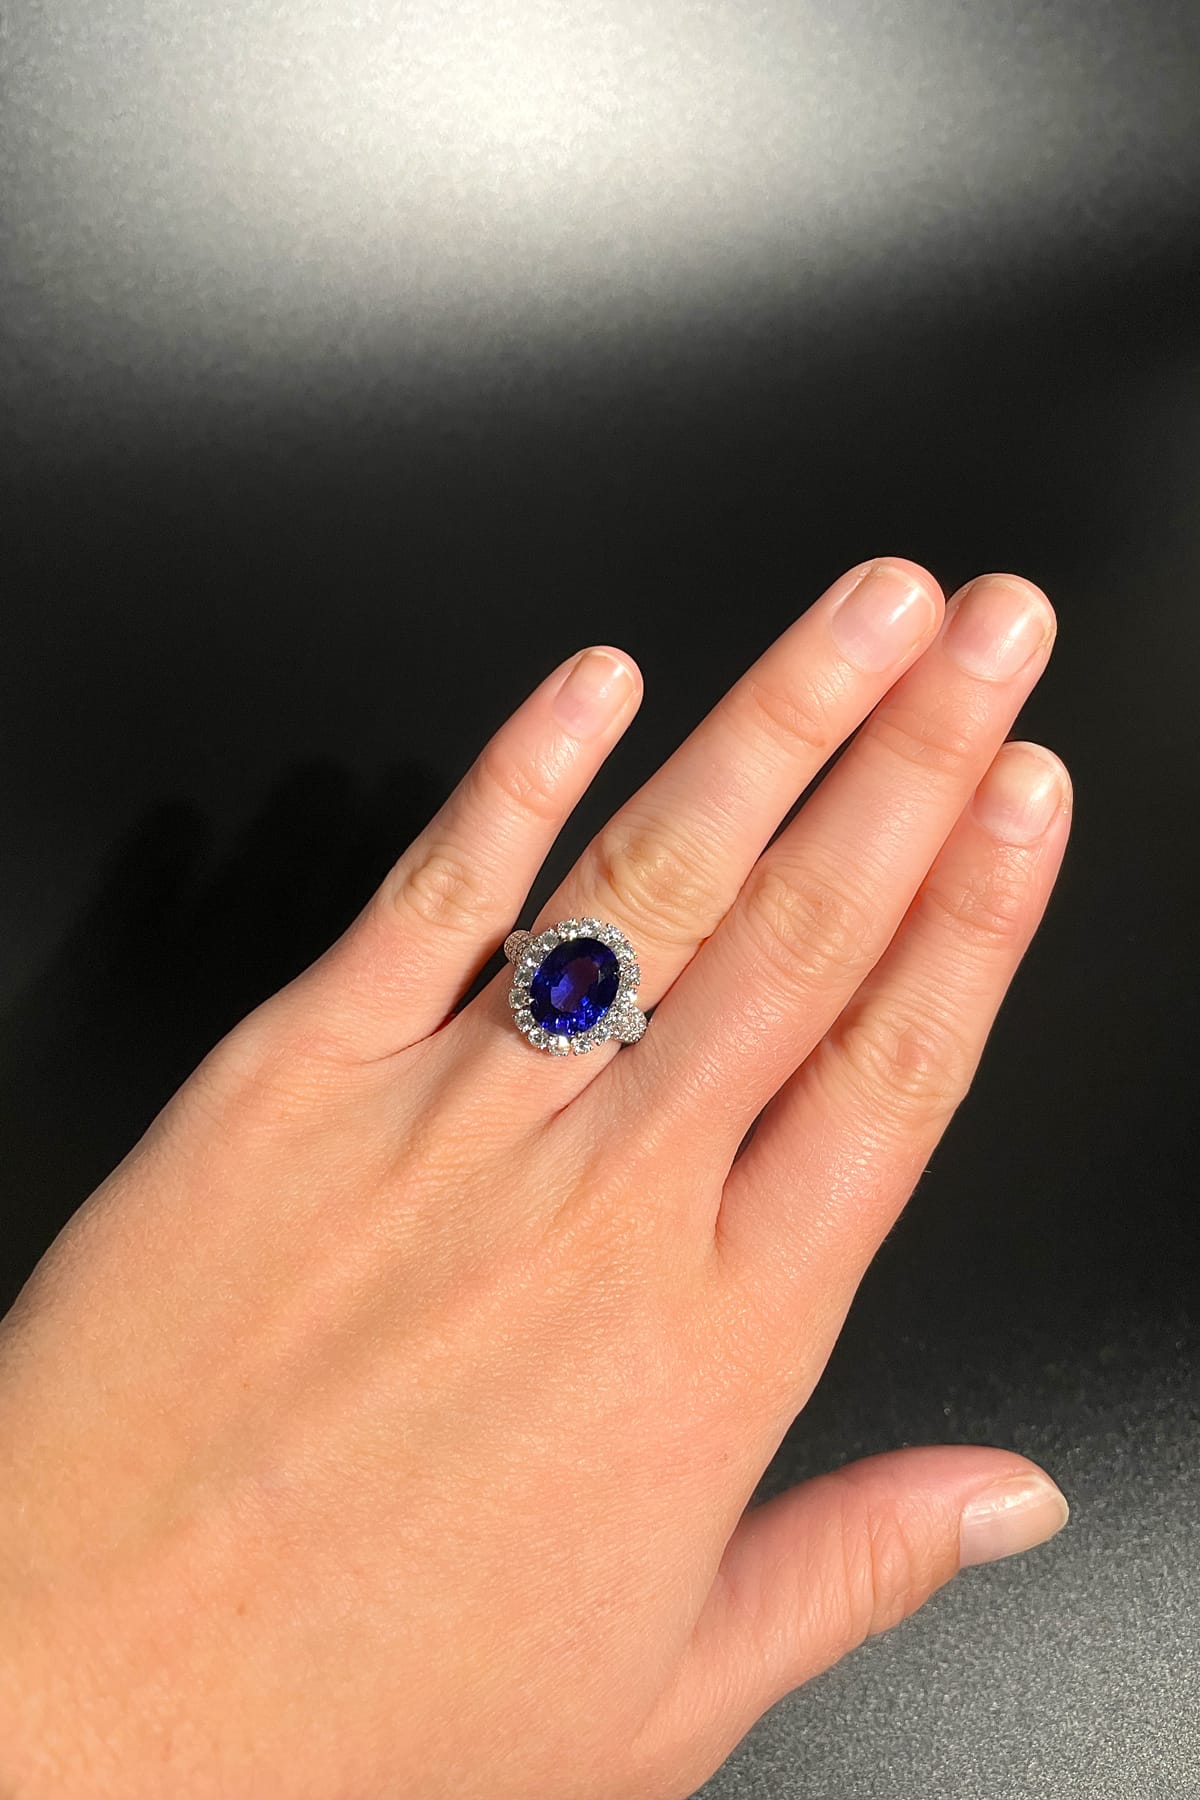 18ct white gold 6.05CT OVAL TANZANITE AND DIAMOND RING available at LeGassick Diamonds and Jewellery Gold Coast, Australia.